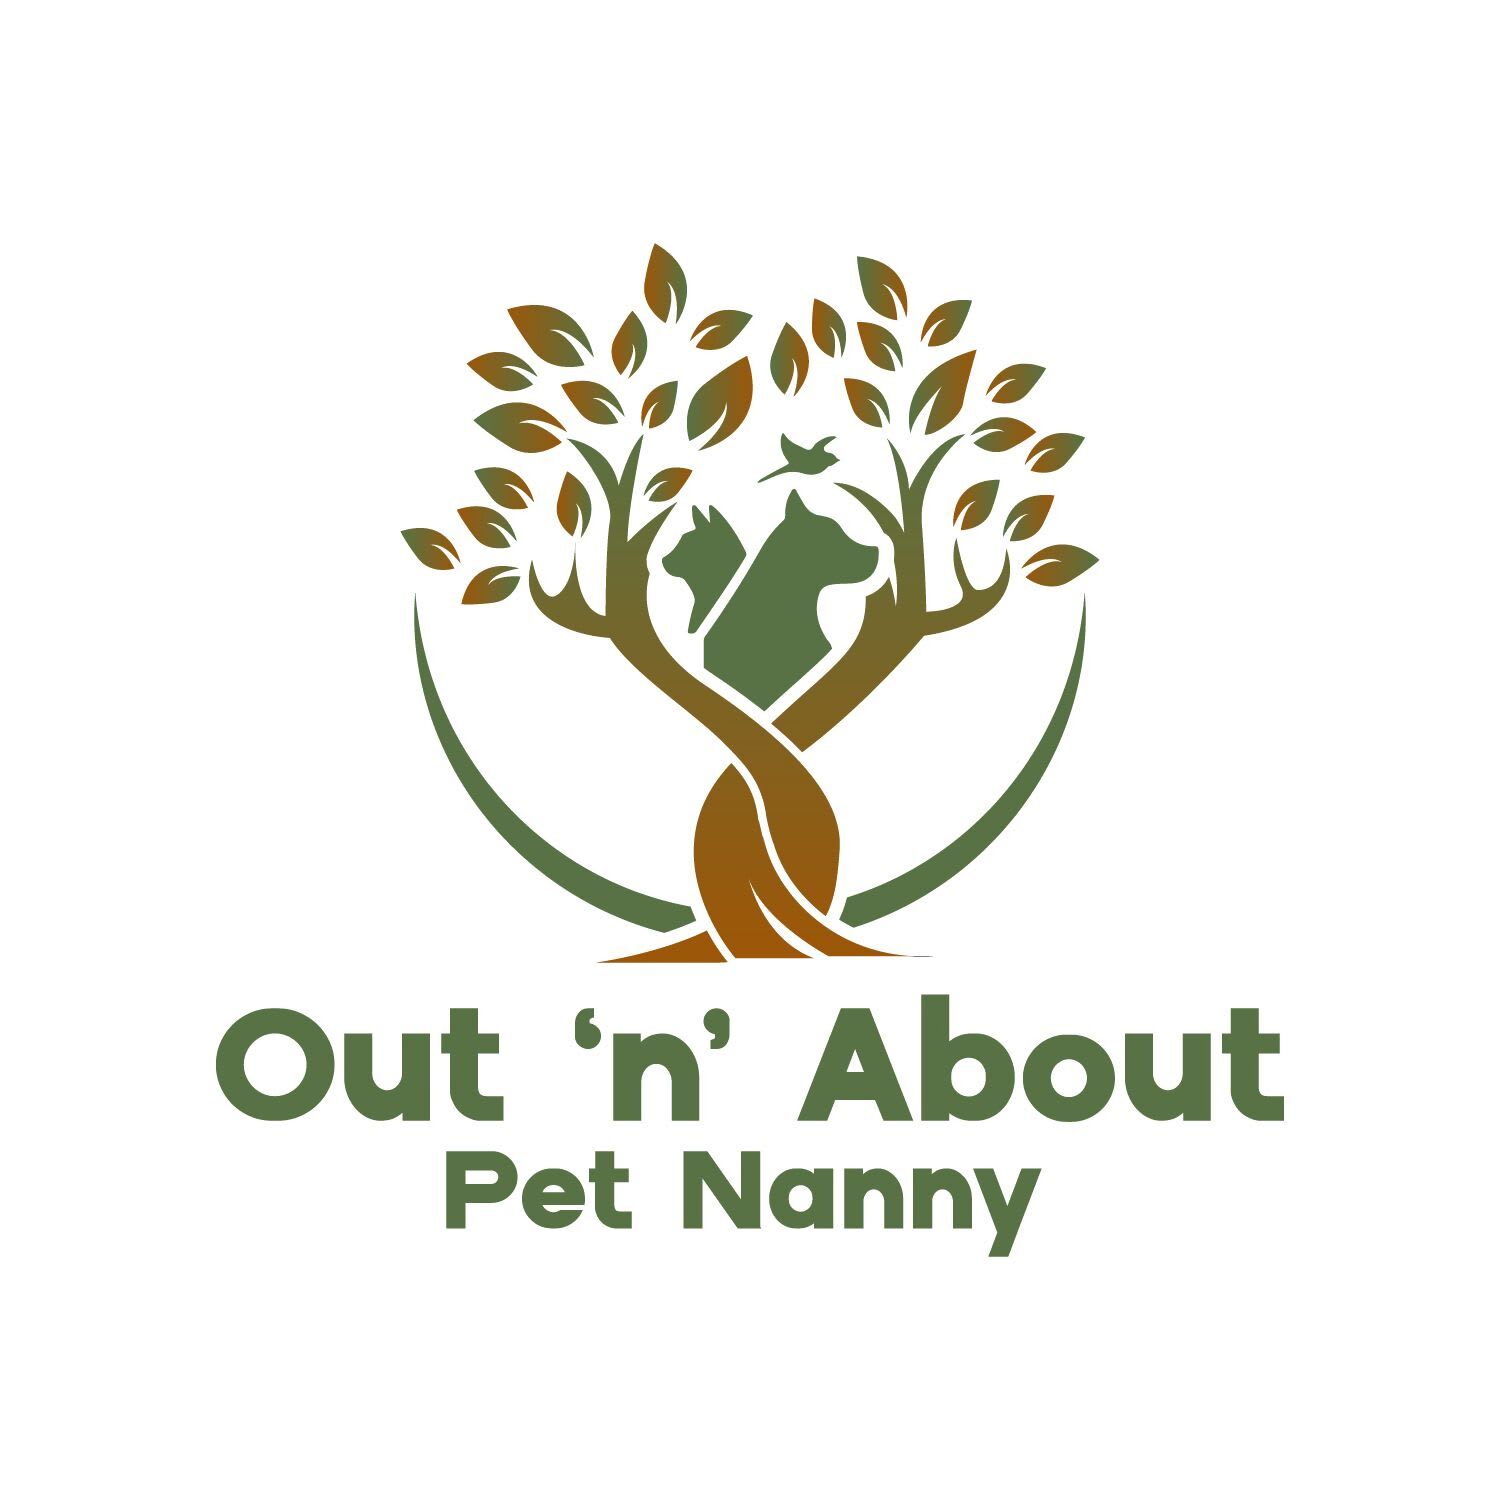 Out 'N' About Pet Nanny - Chesterfield, Derbyshire S41 8XB - 07508 073599 | ShowMeLocal.com